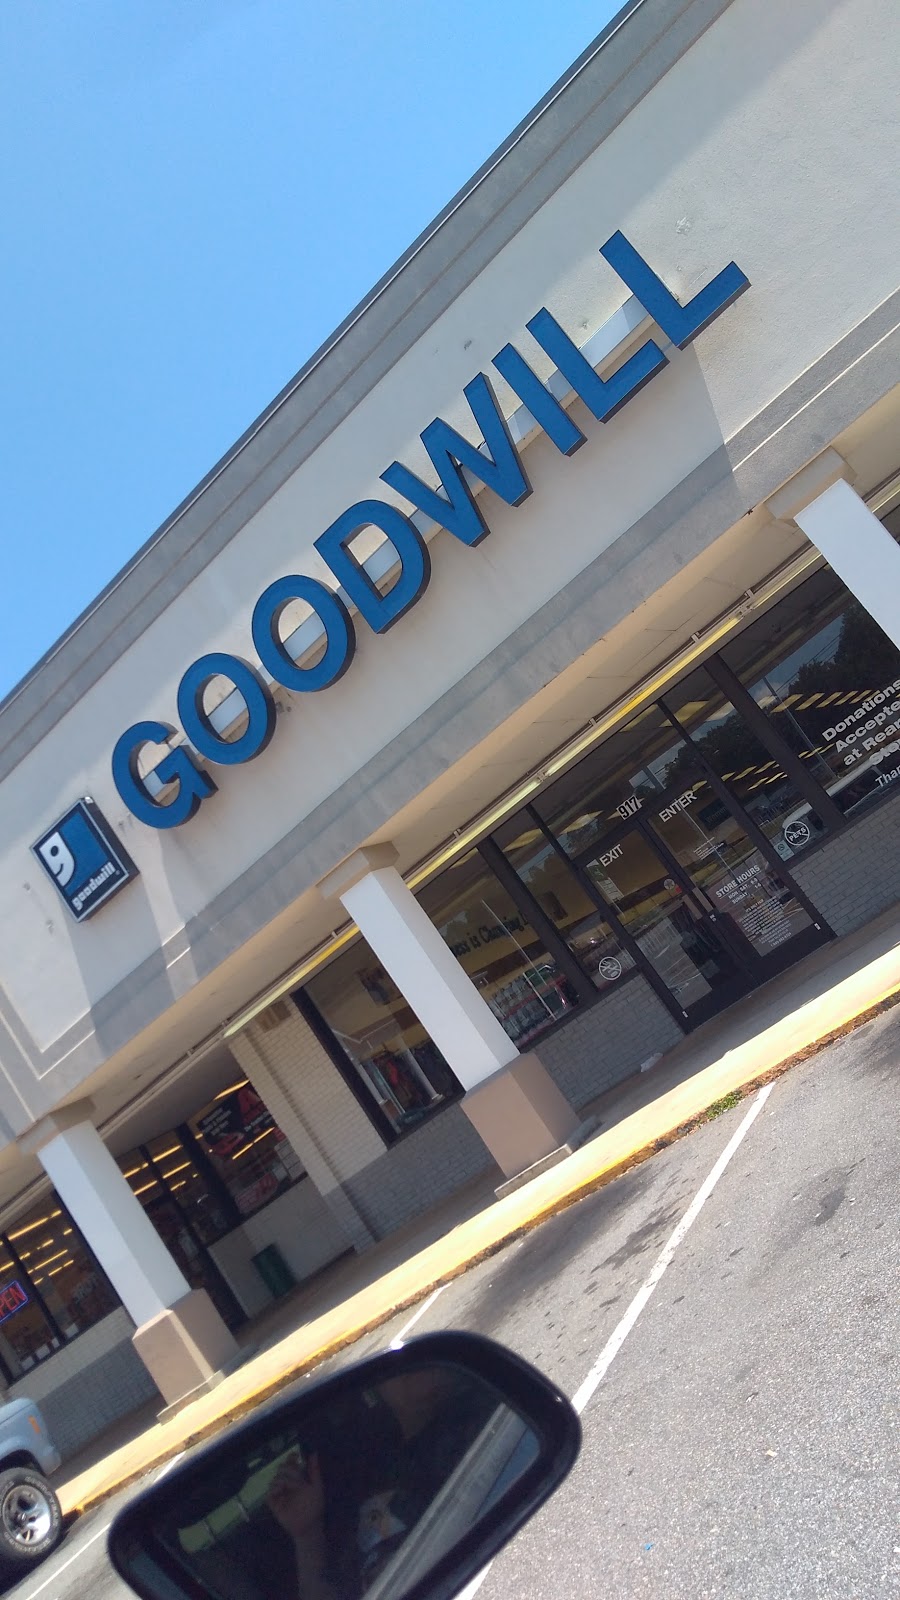 Goodwill Store and Donation Center | 917 S State St, Yadkinville, NC 27055, USA | Phone: (336) 679-2040